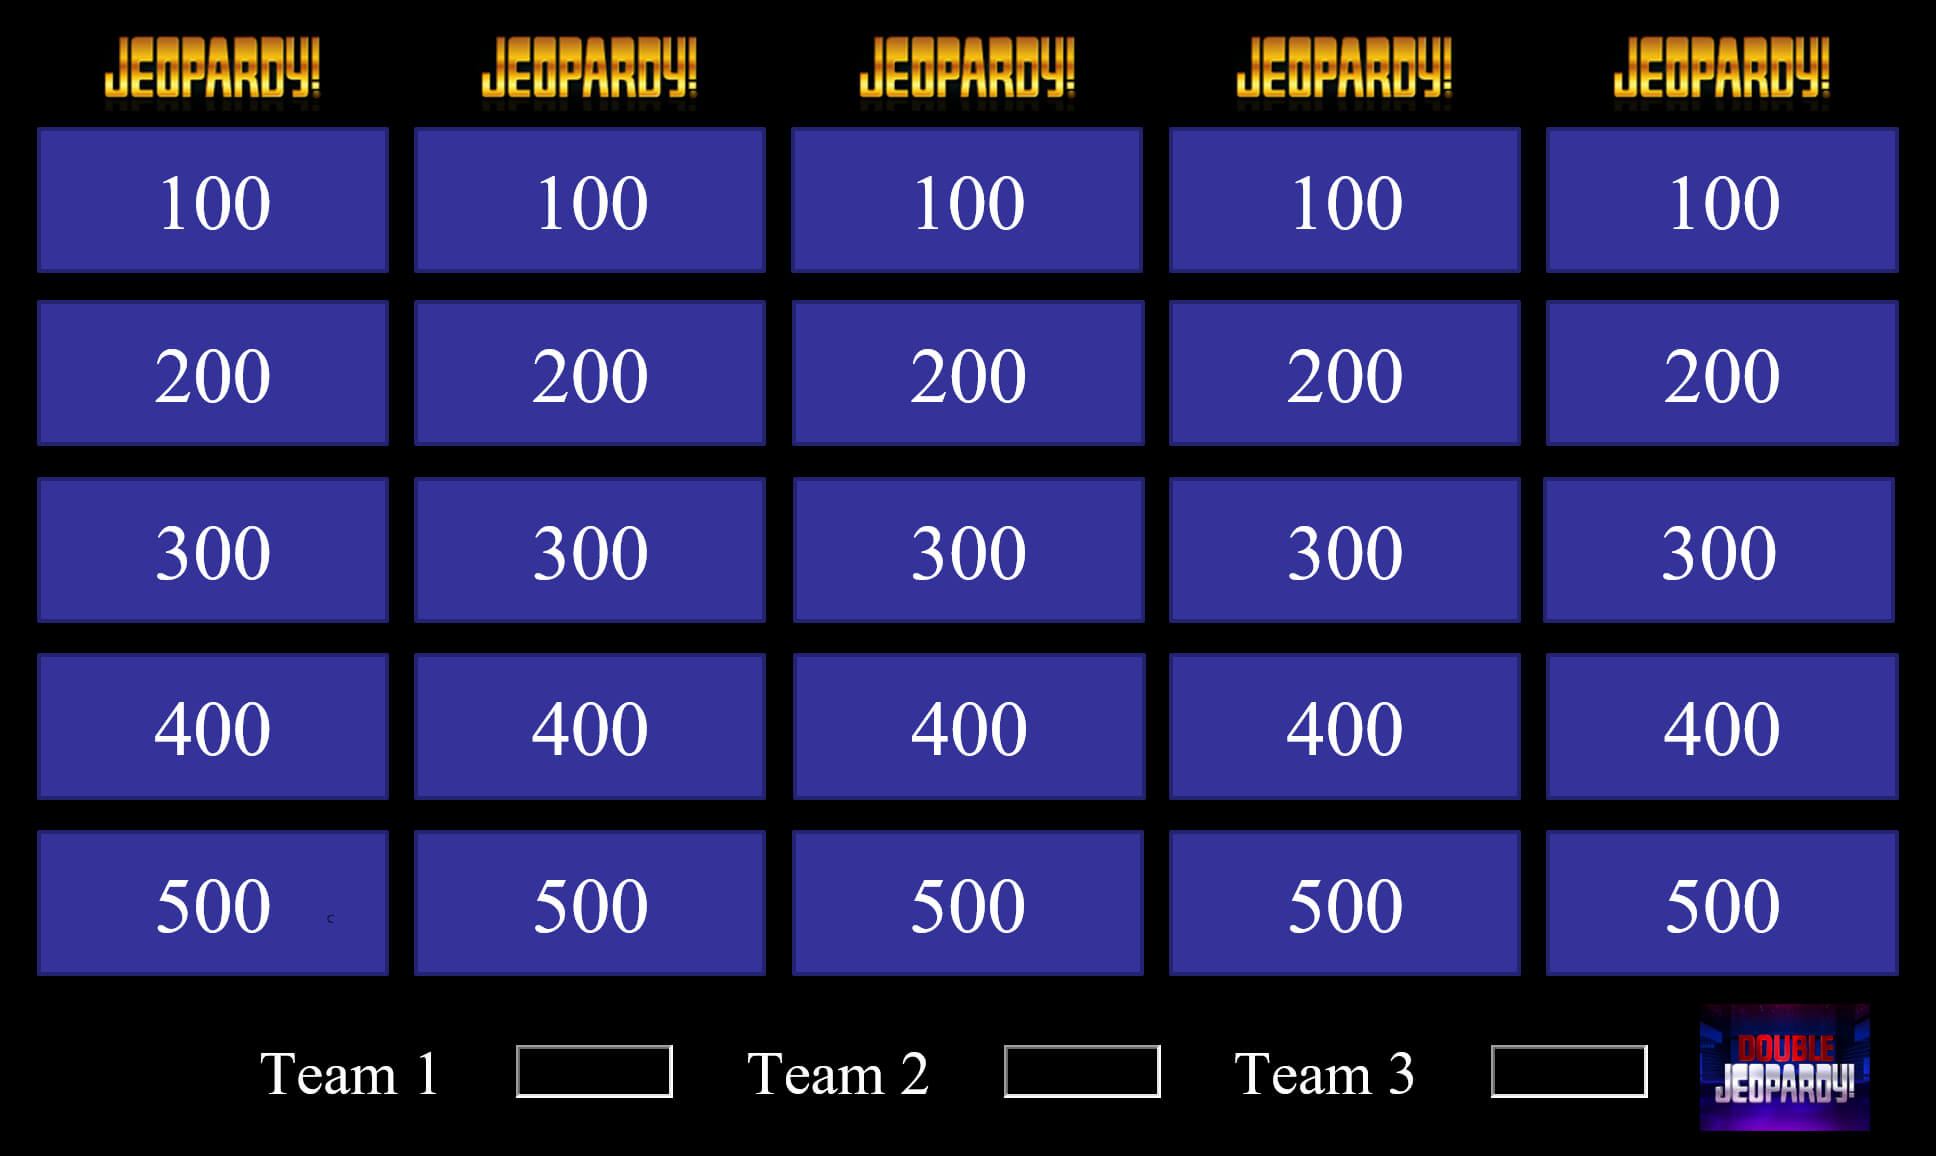 033 Jeopardy Powerpoint Template With Score Excellent Ideas For Jeopardy Powerpoint Template With Score